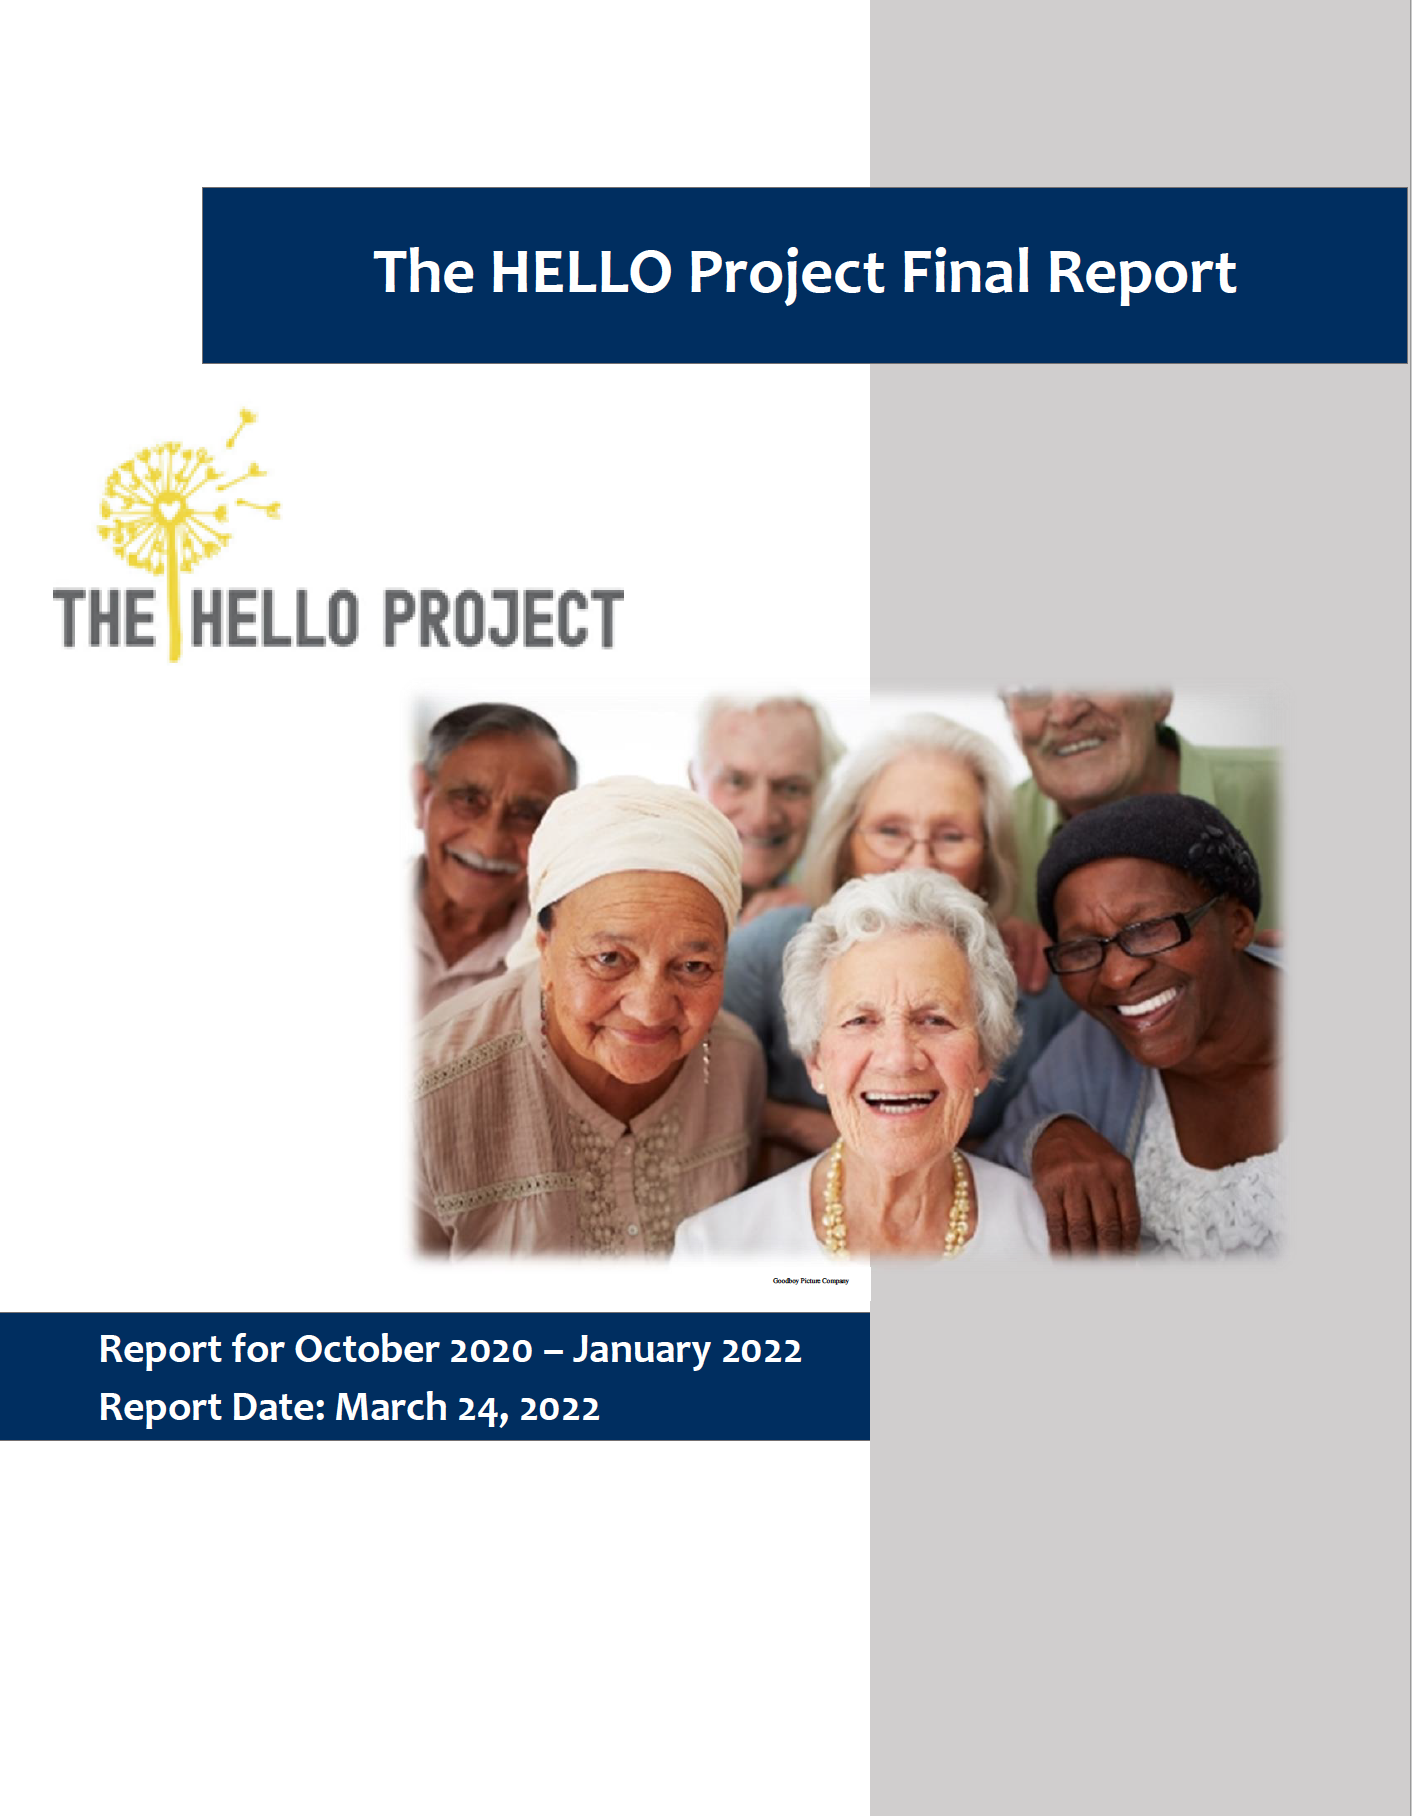 The HELLO Project Final Report